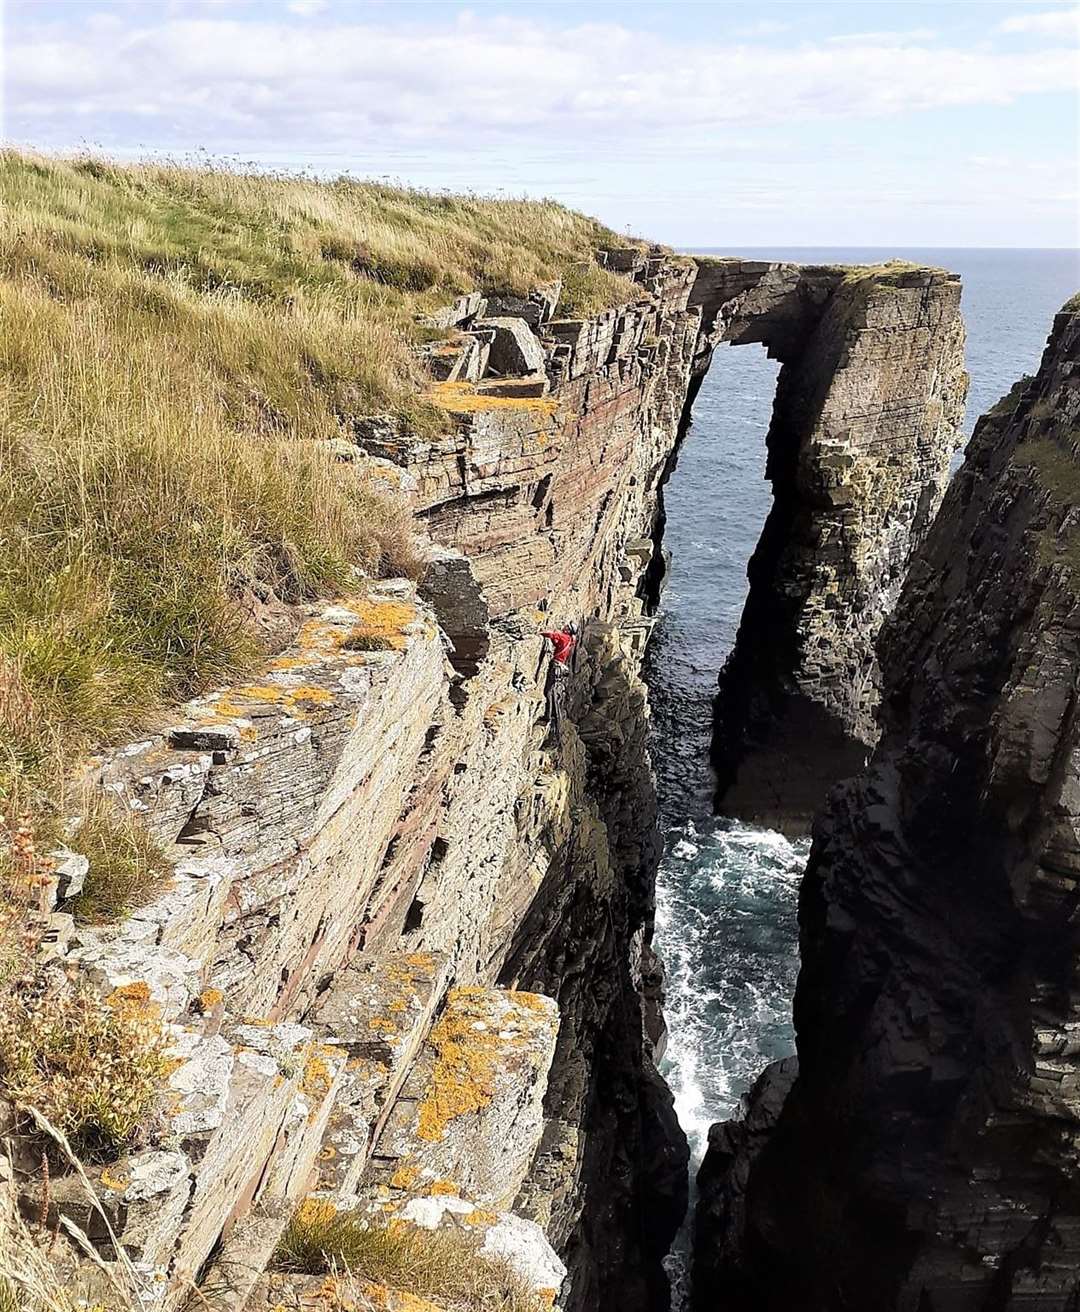 A climber in red can be seen scaling the cliff face near the Brig of Stack.